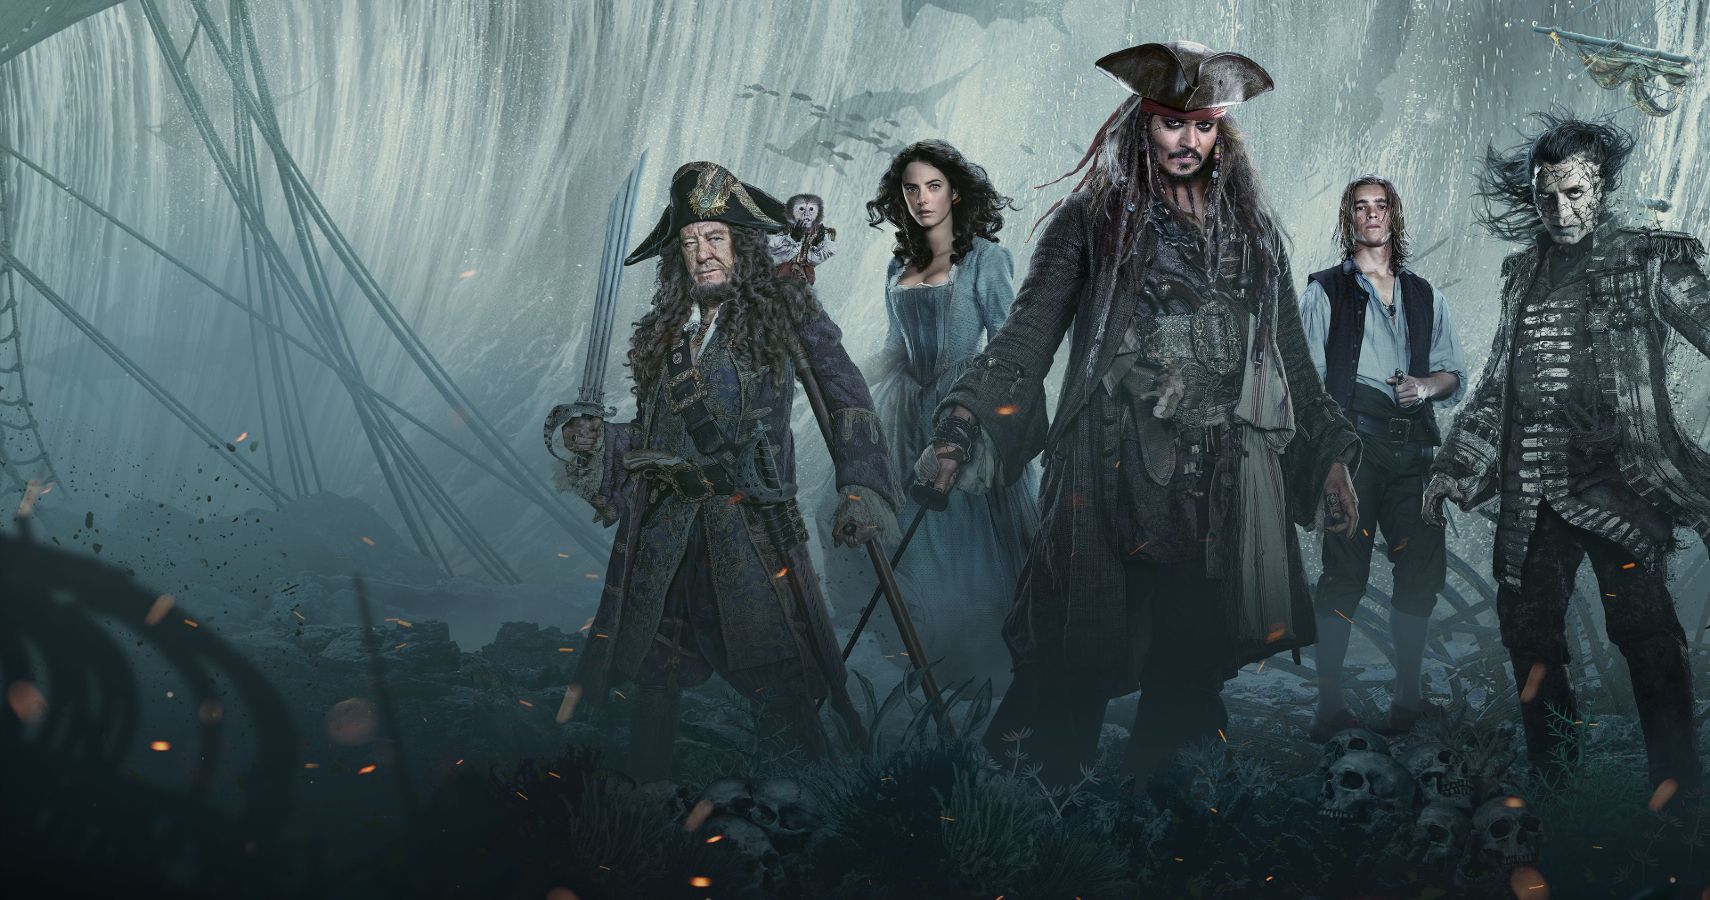 Pirates of the Caribbean free download